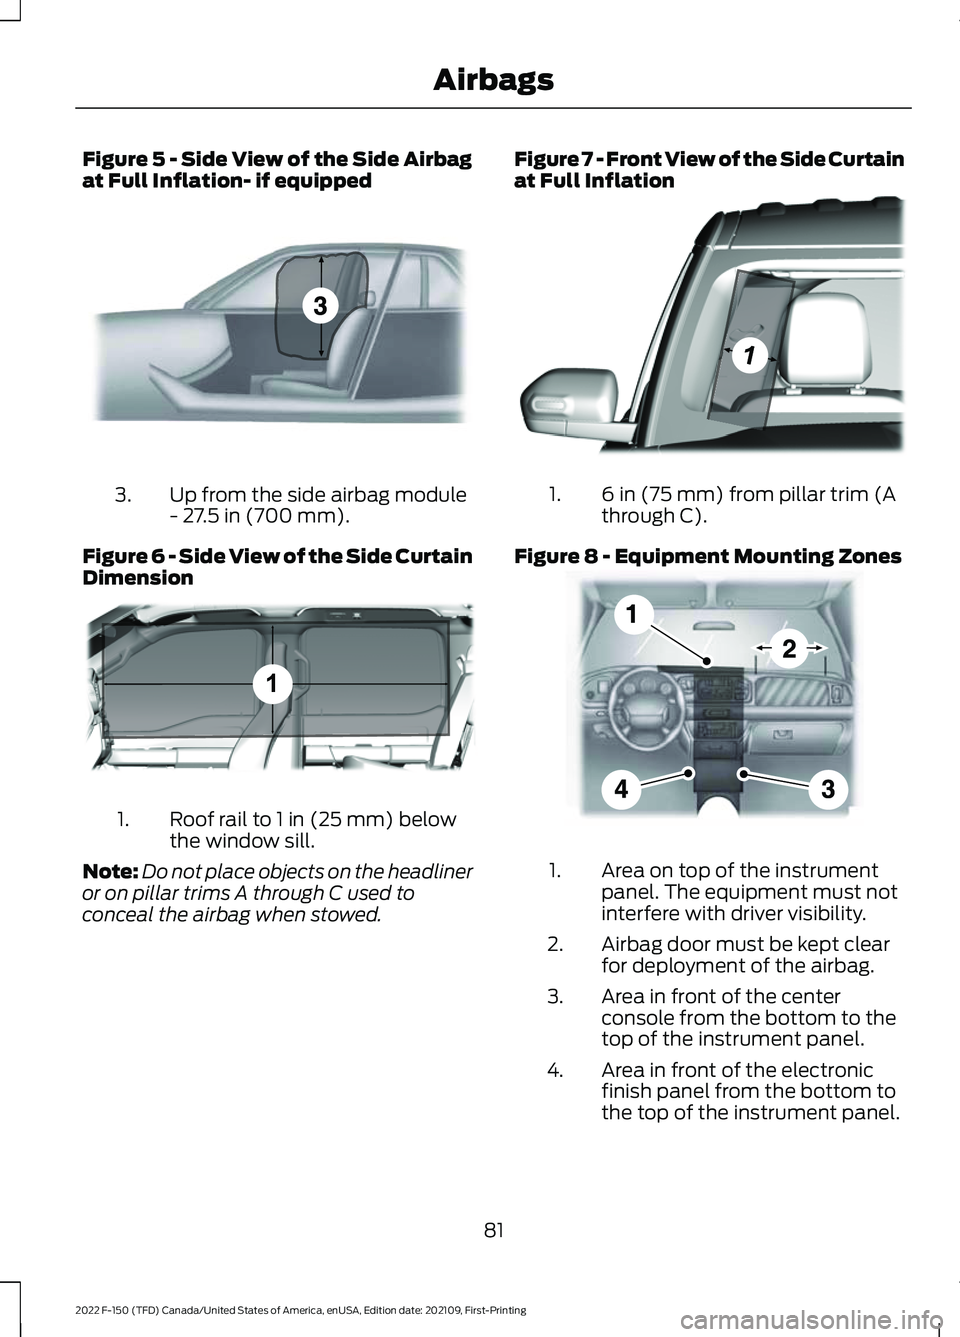 FORD F-150 2022 Manual Online Figure 5 - Side View of the Side Airbag
at Full Inflation- if equipped
Up from the side airbag module
- 27.5 in (700 mm).
3.
Figure 6 - Side View of the Side Curtain
Dimension Roof rail to 1 in (25 mm